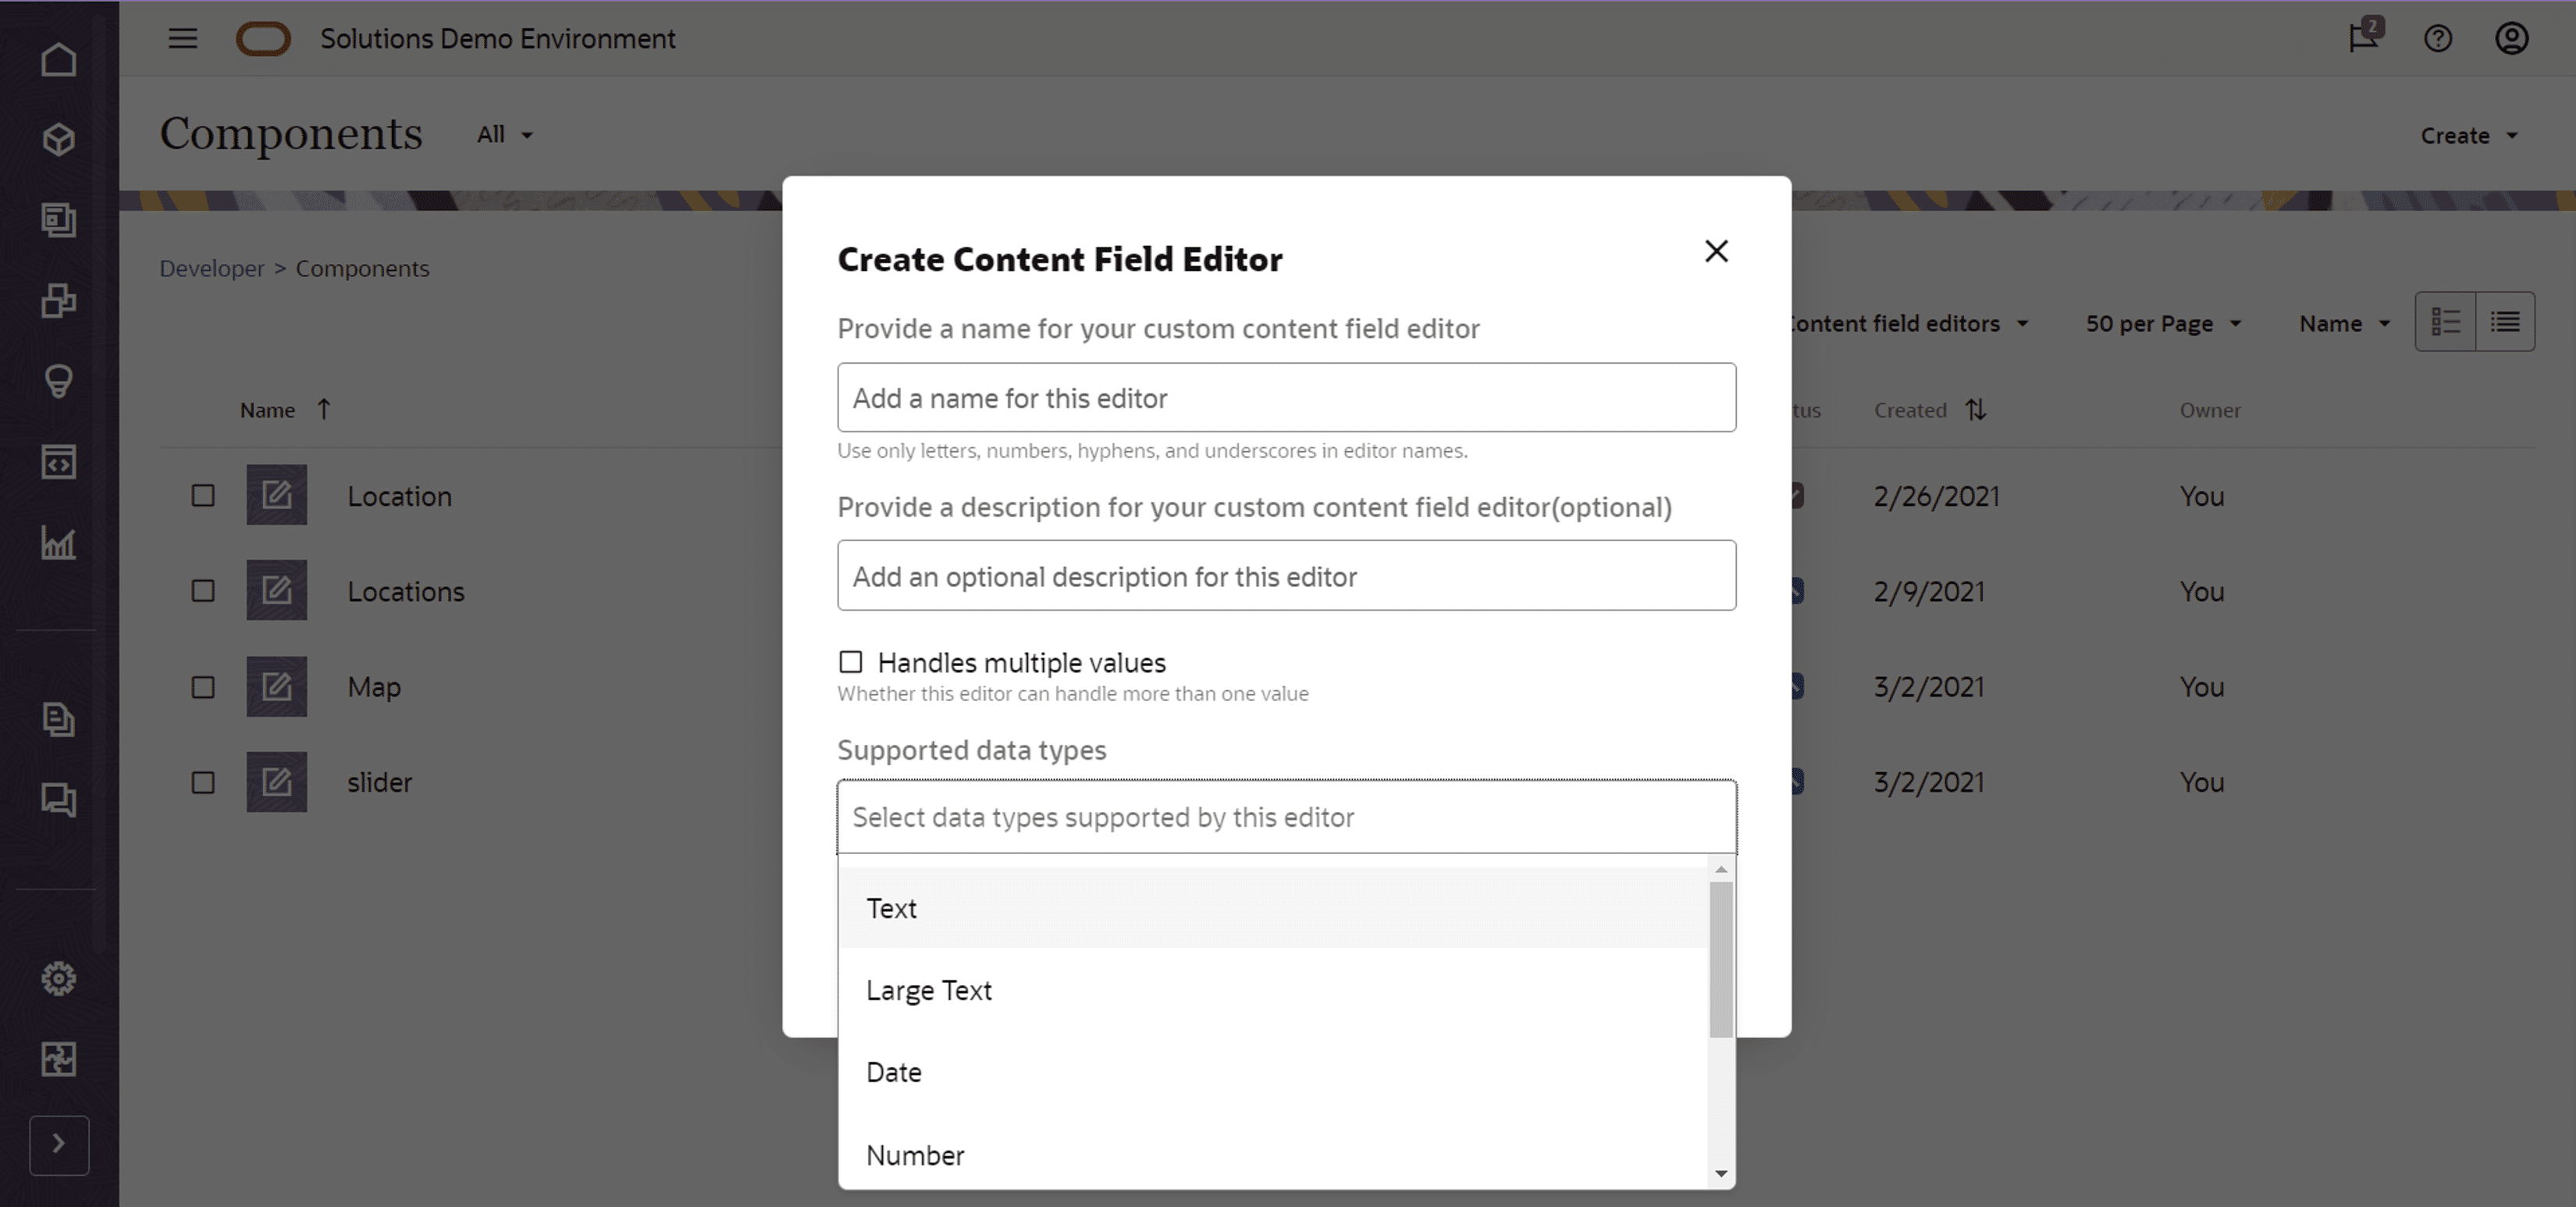 Create Content Field Editor Example